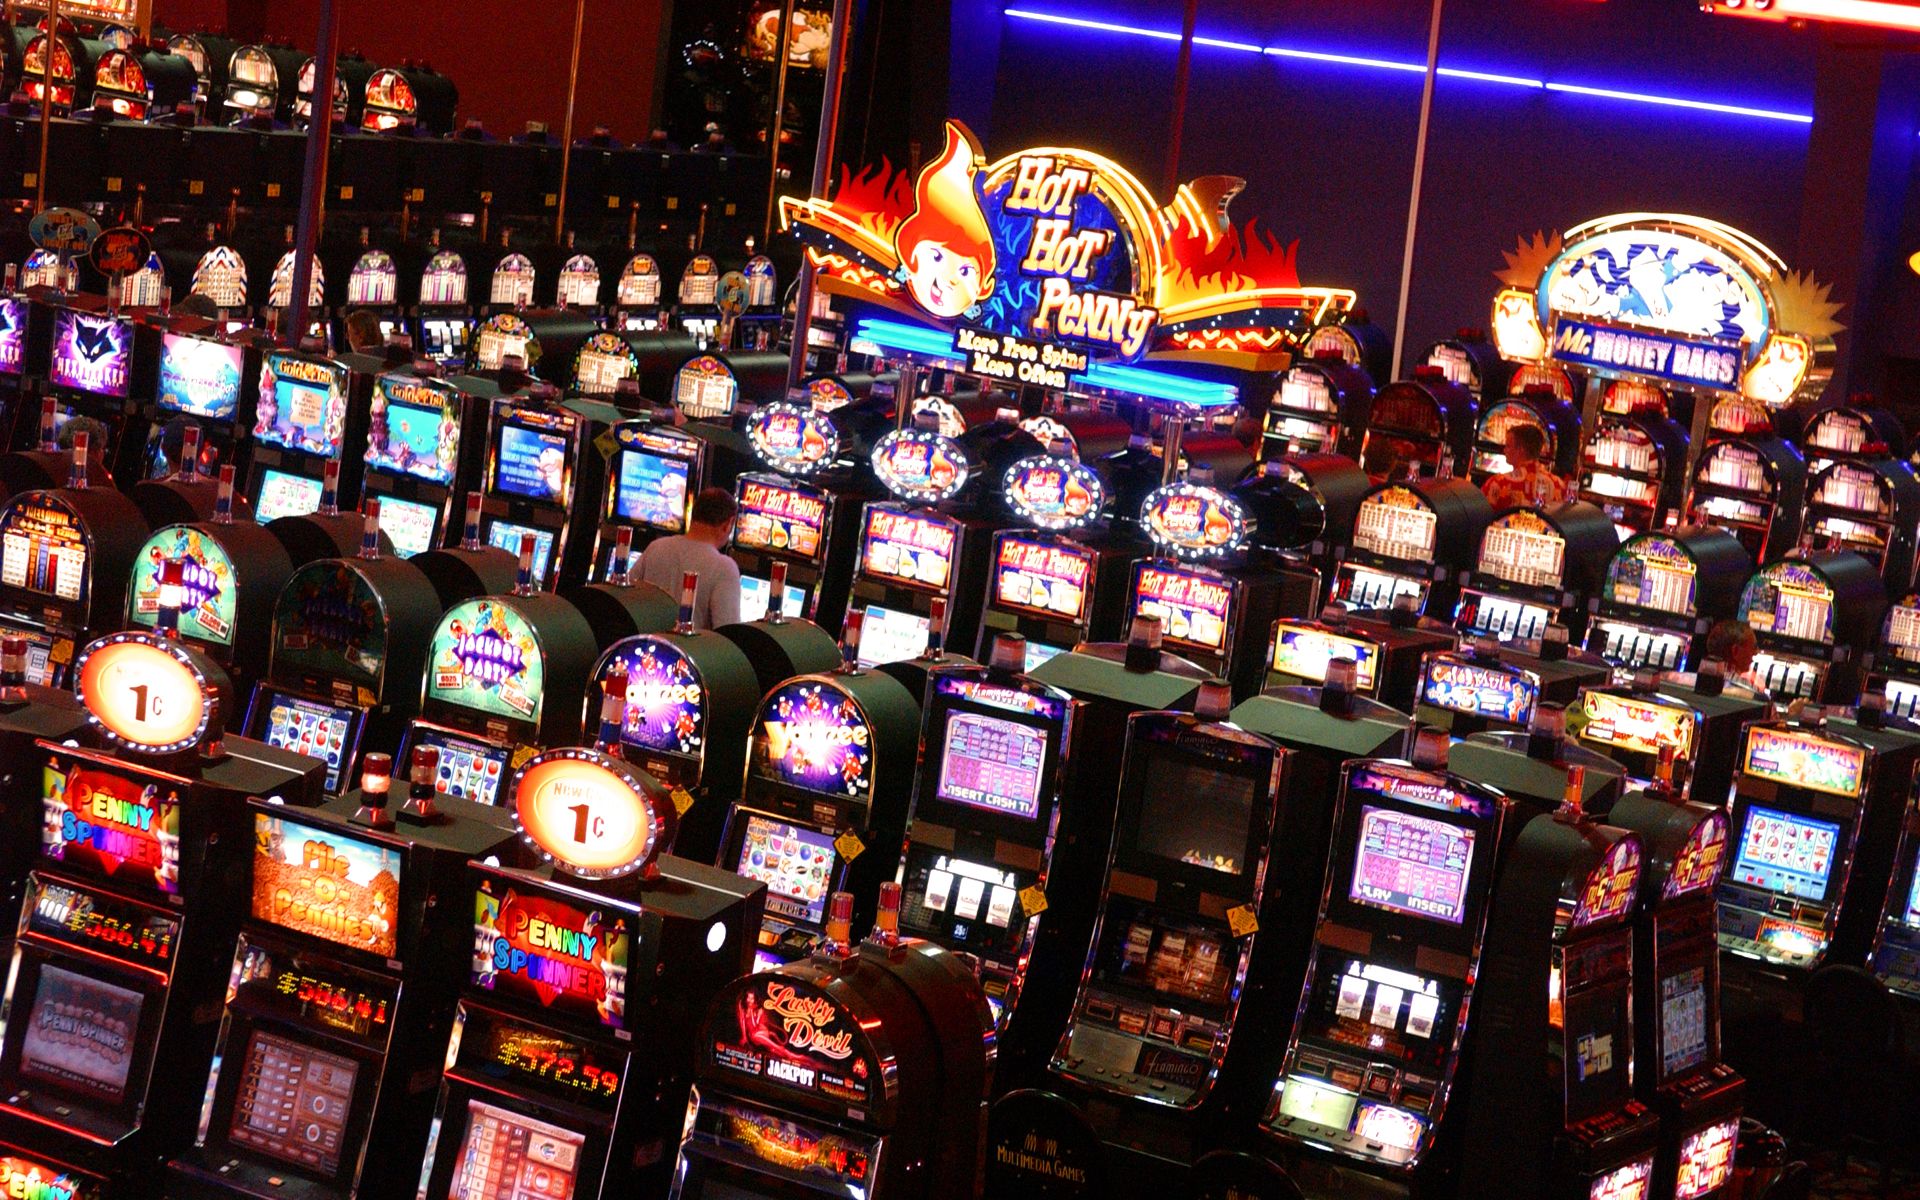 Casinos being popular with the introduction of slot games